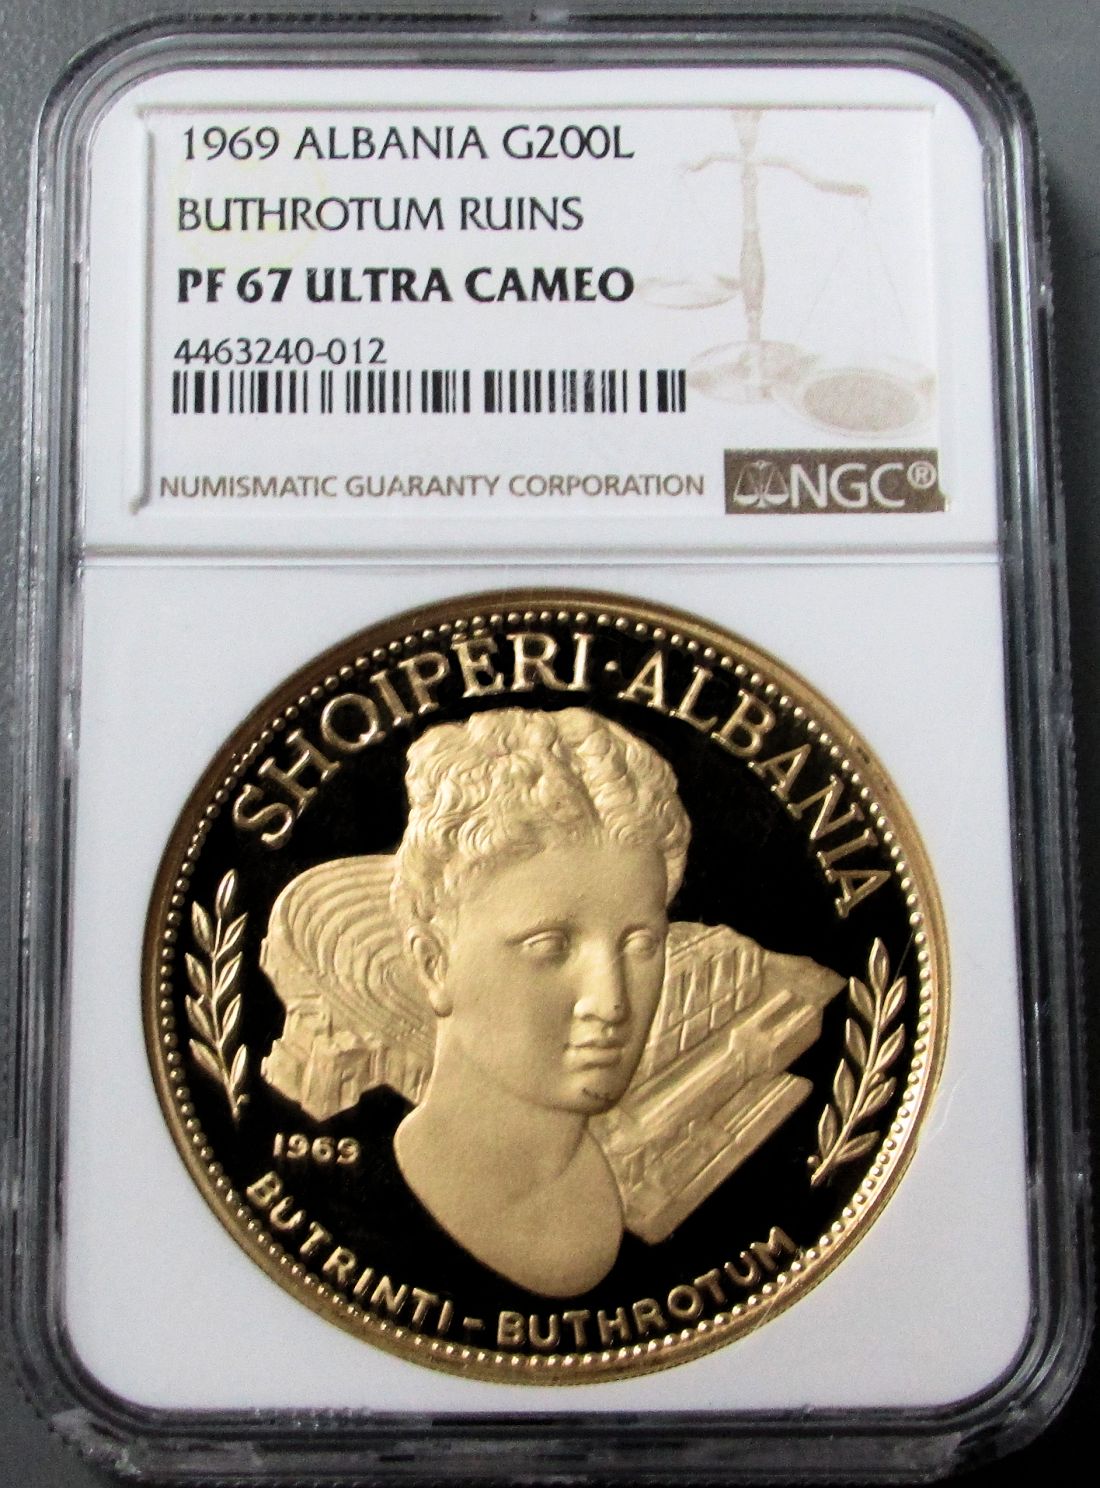 1969 GOLD ALBANIA 200 LEKE NGC PROOF 67 ULTRA CAMEO "ANCIENT BUTHROTUM RUINS" ONLY 100 MINTED 